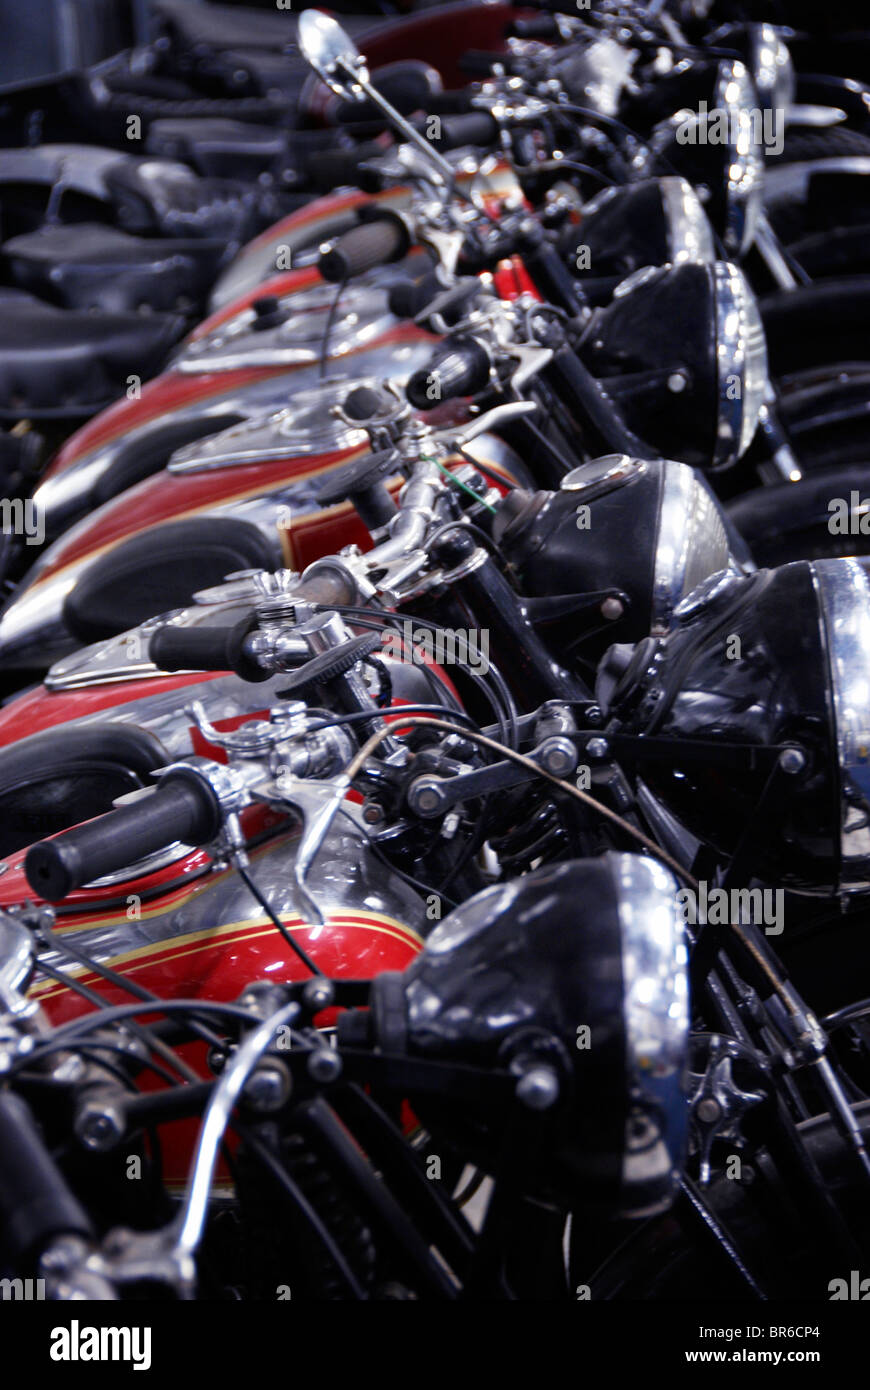 Just a few of the fantastic collection of motorbikes at the Powerhouse Motorcycle Museum in Tamworth, New South Wales 2340, Australia Stock Photo